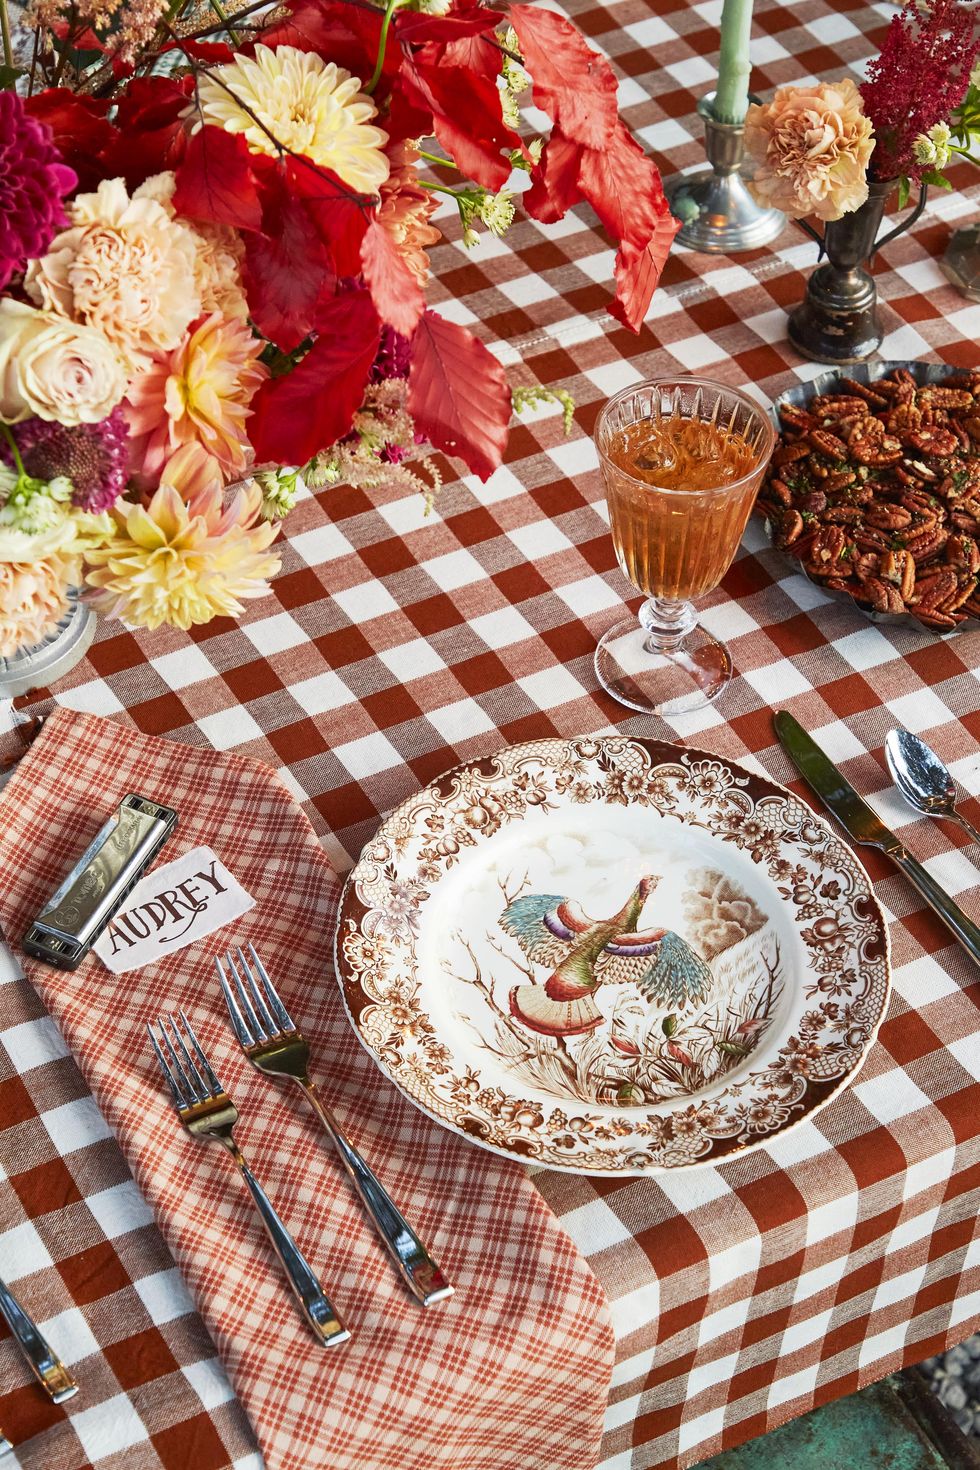 https://hips.hearstapps.com/hmg-prod/images/thanksgiving-table-setting-mississippi-1668347961.jpg?crop=1xw:1xh;center,top&resize=980:*